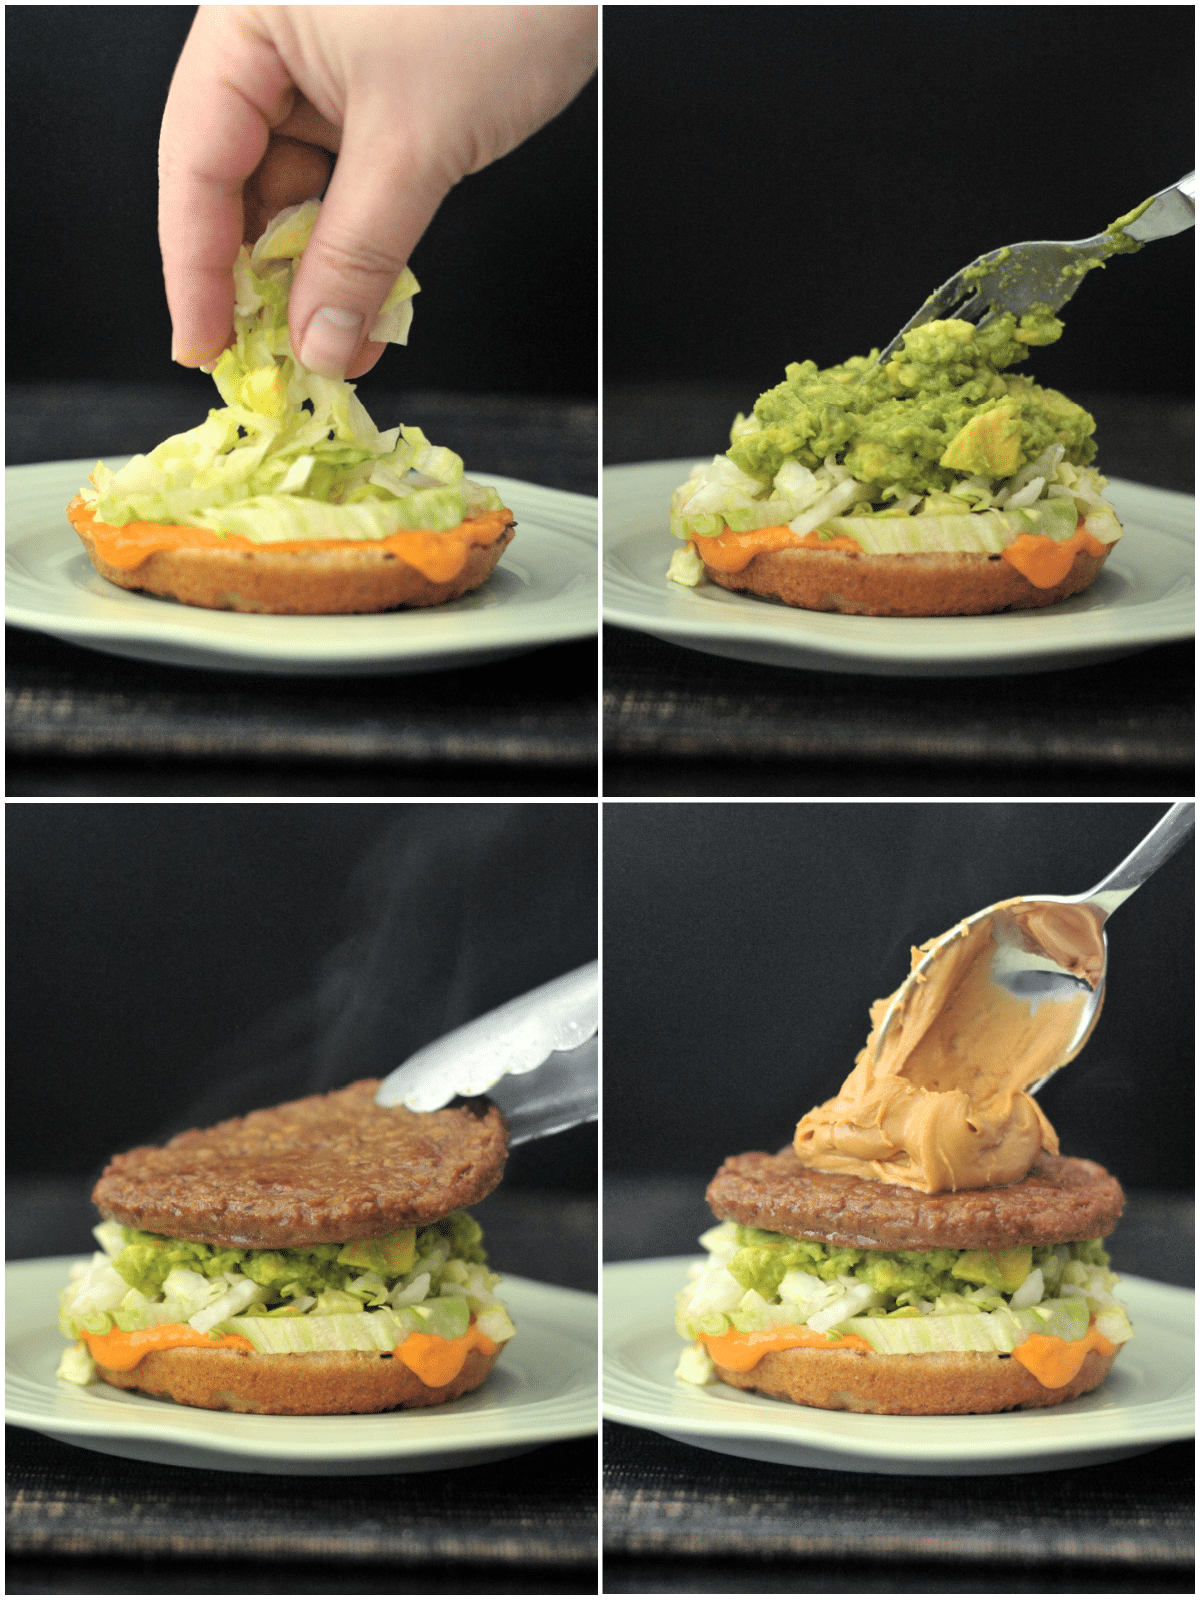 a four photo collage shows first steps in how to make a spicy peanut butter burger: to a bottom bun, add spicy kimchi sauce, shredded lettuce, mashed avocado, veggie burger patty, a tablespoon of peanut butter.